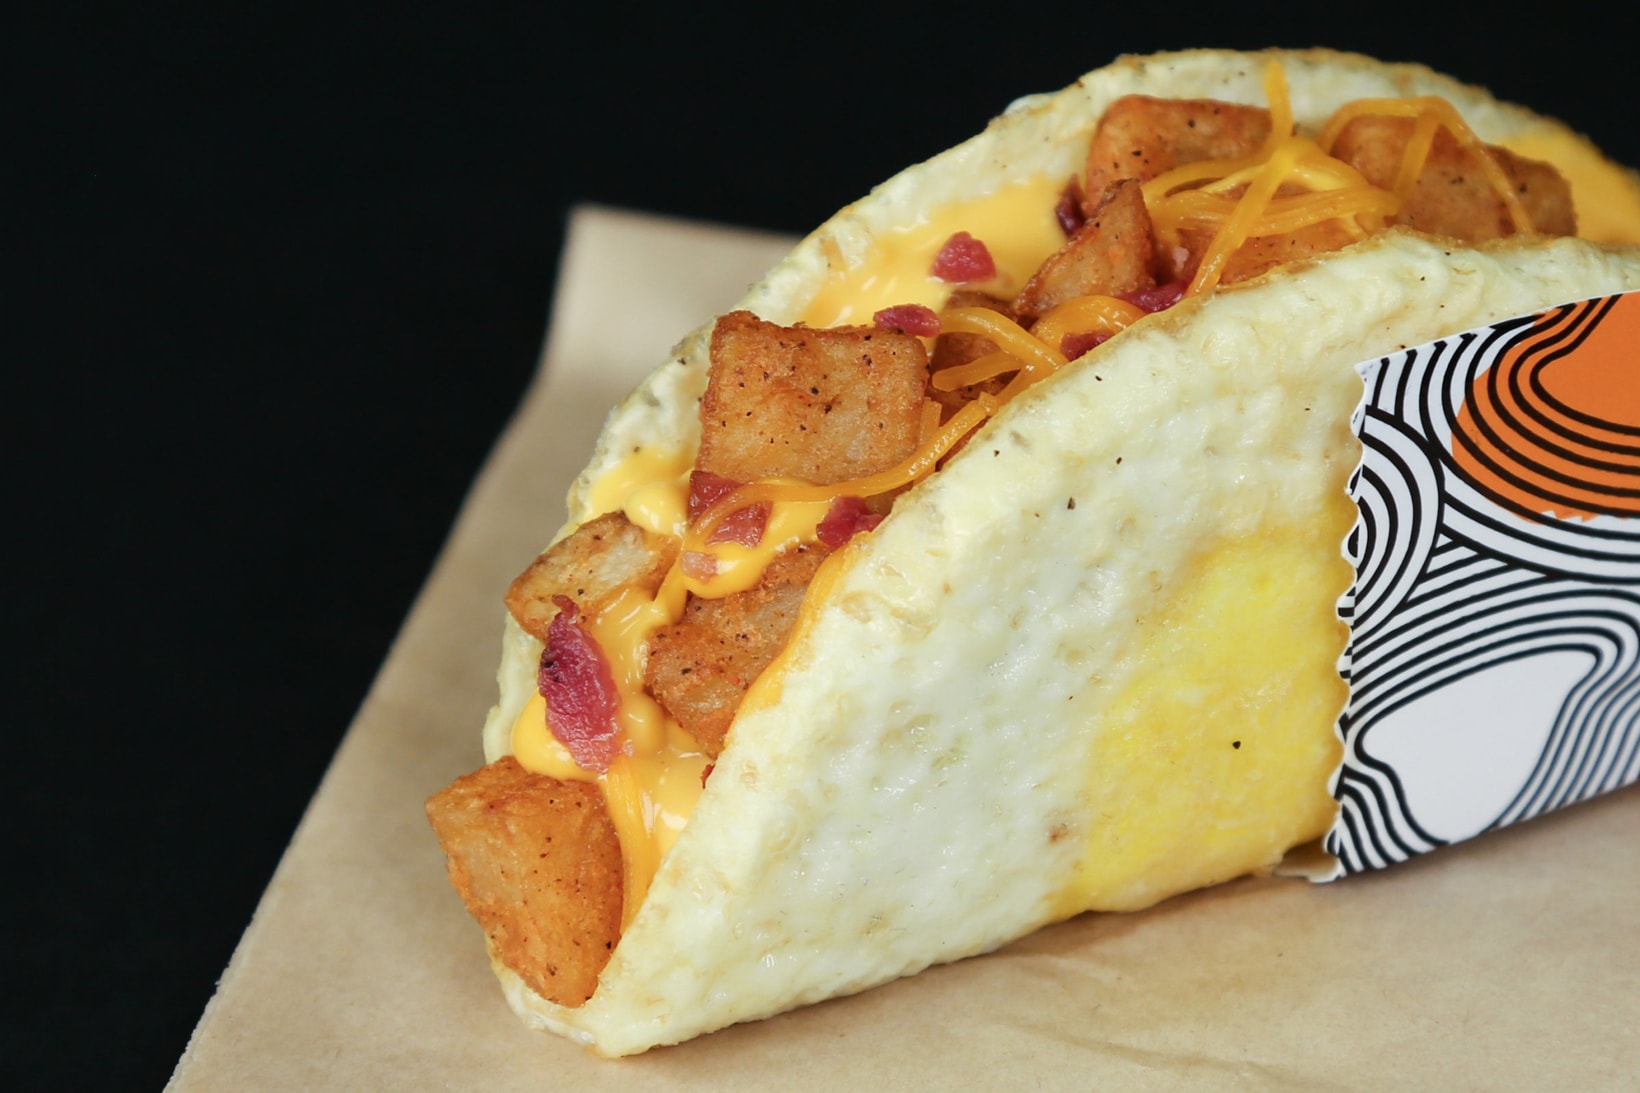 Taco Bell Naked Egg Taco Fried Egg Shell Breakfast Potatoes Cheese Sausage Bacon Fast Food